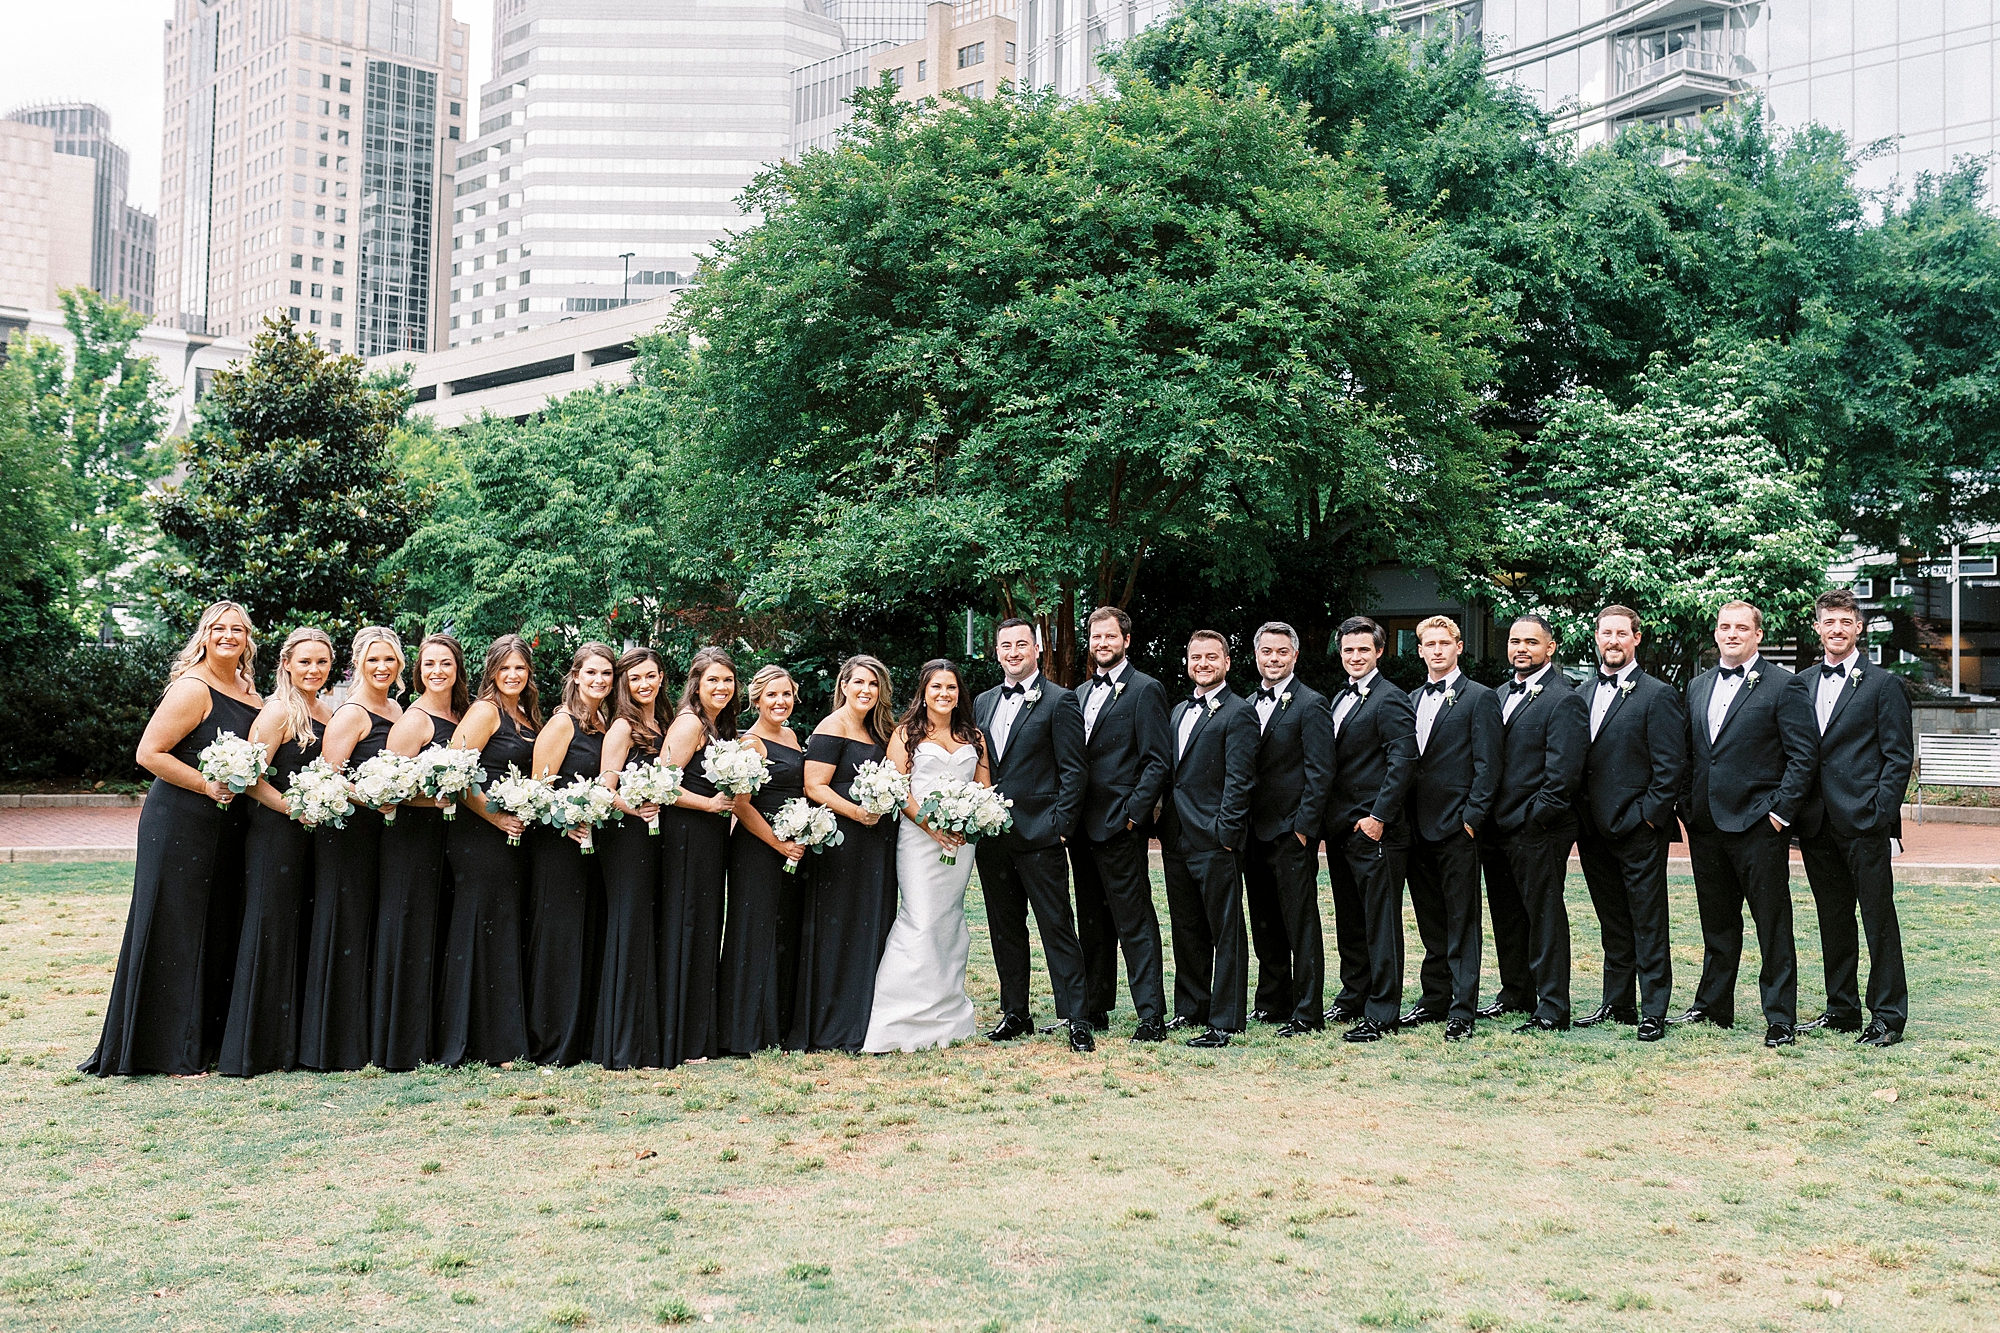 bride and groom stand in park with wedding party in black attire